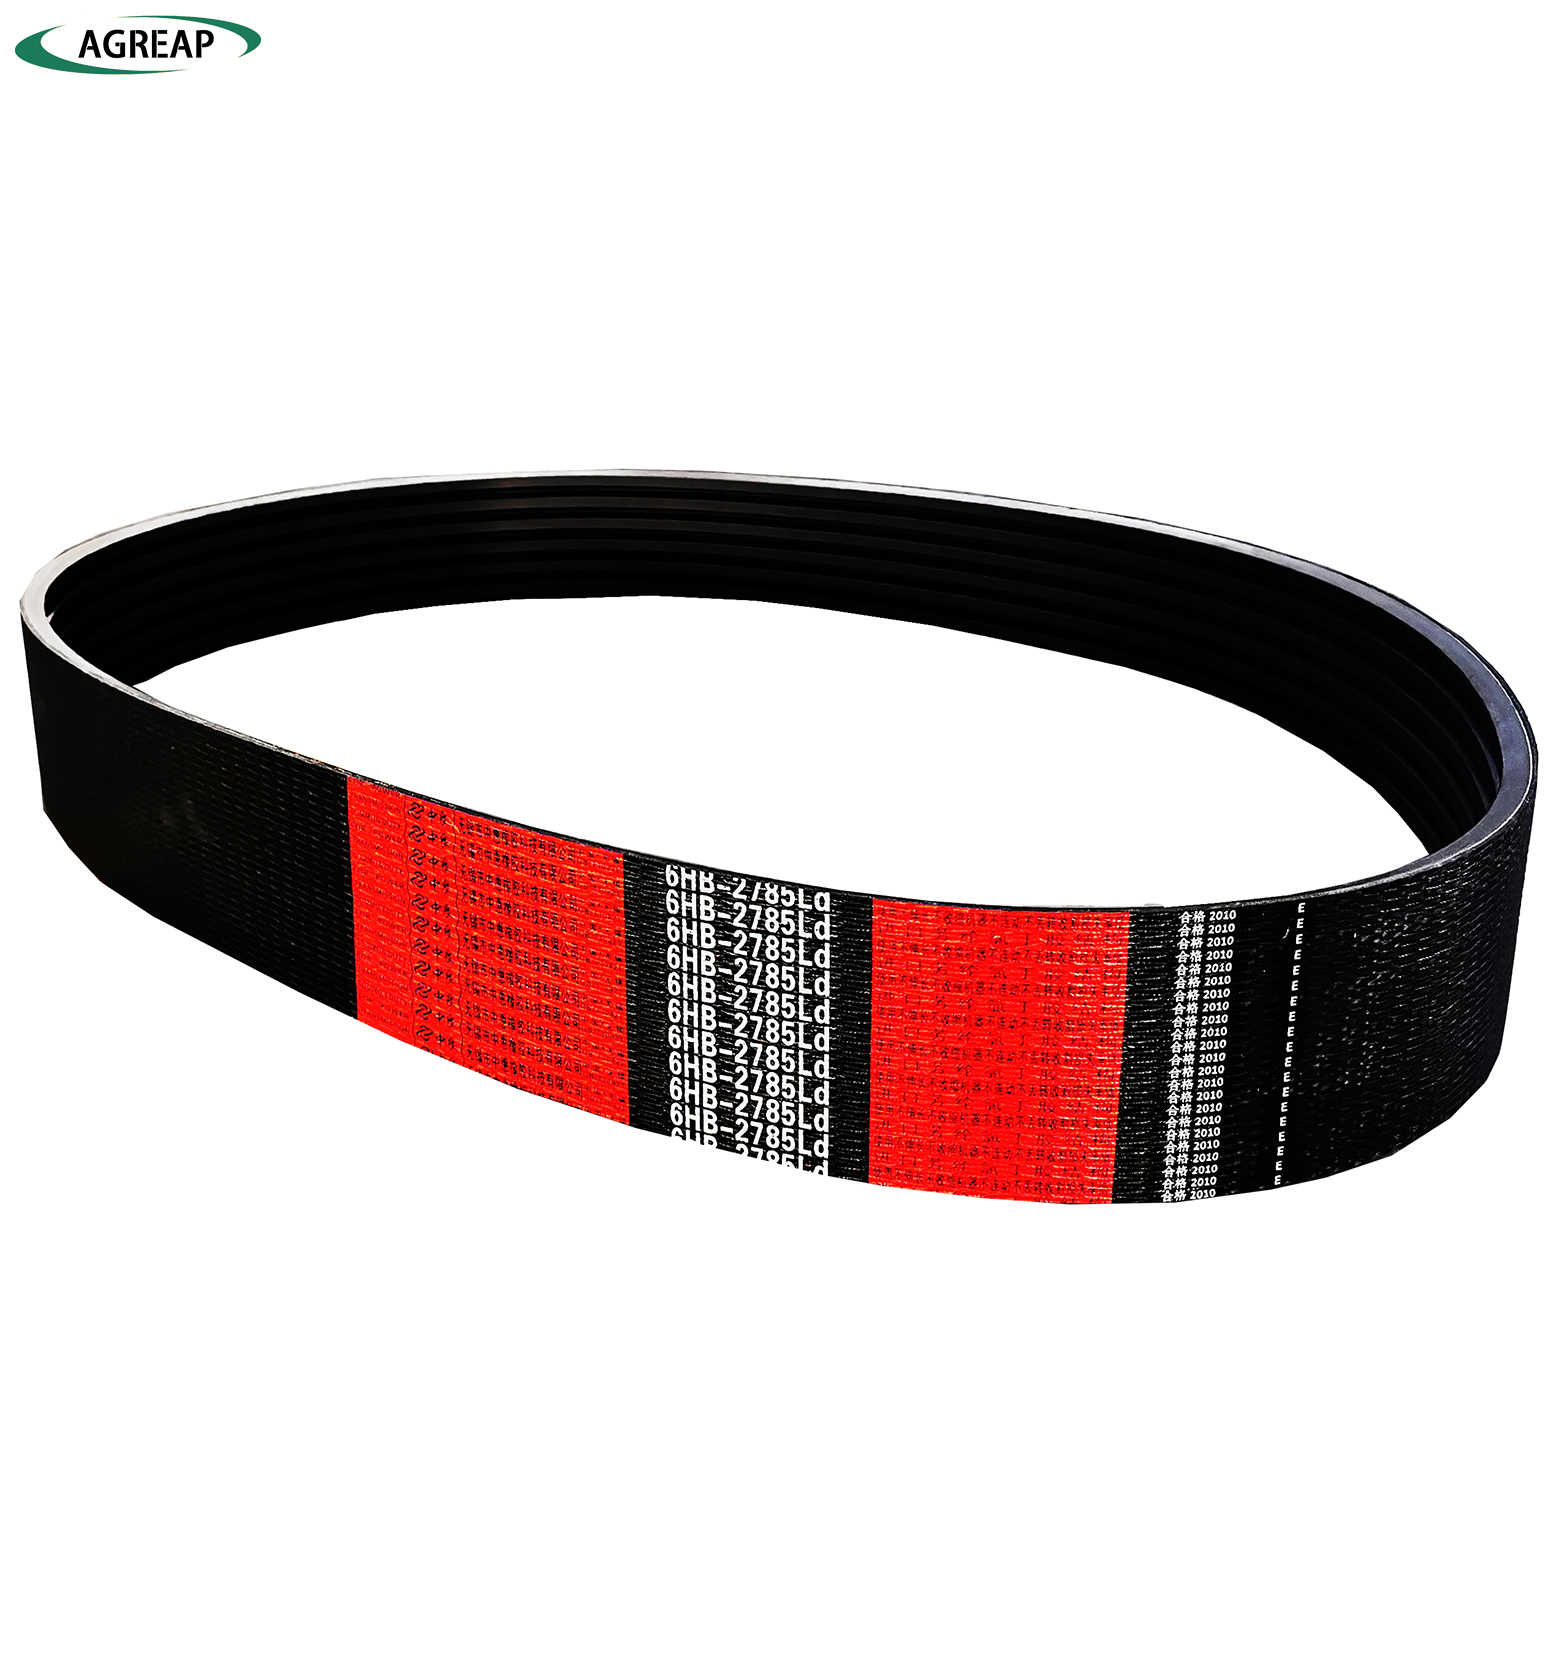 Banded(Joined/Ribbed) Wrapped Belts 2HB, 3HB, 4HB, 5HB, 6HB, 2HC, 3HC, 4HC, 5HC, 6HC 